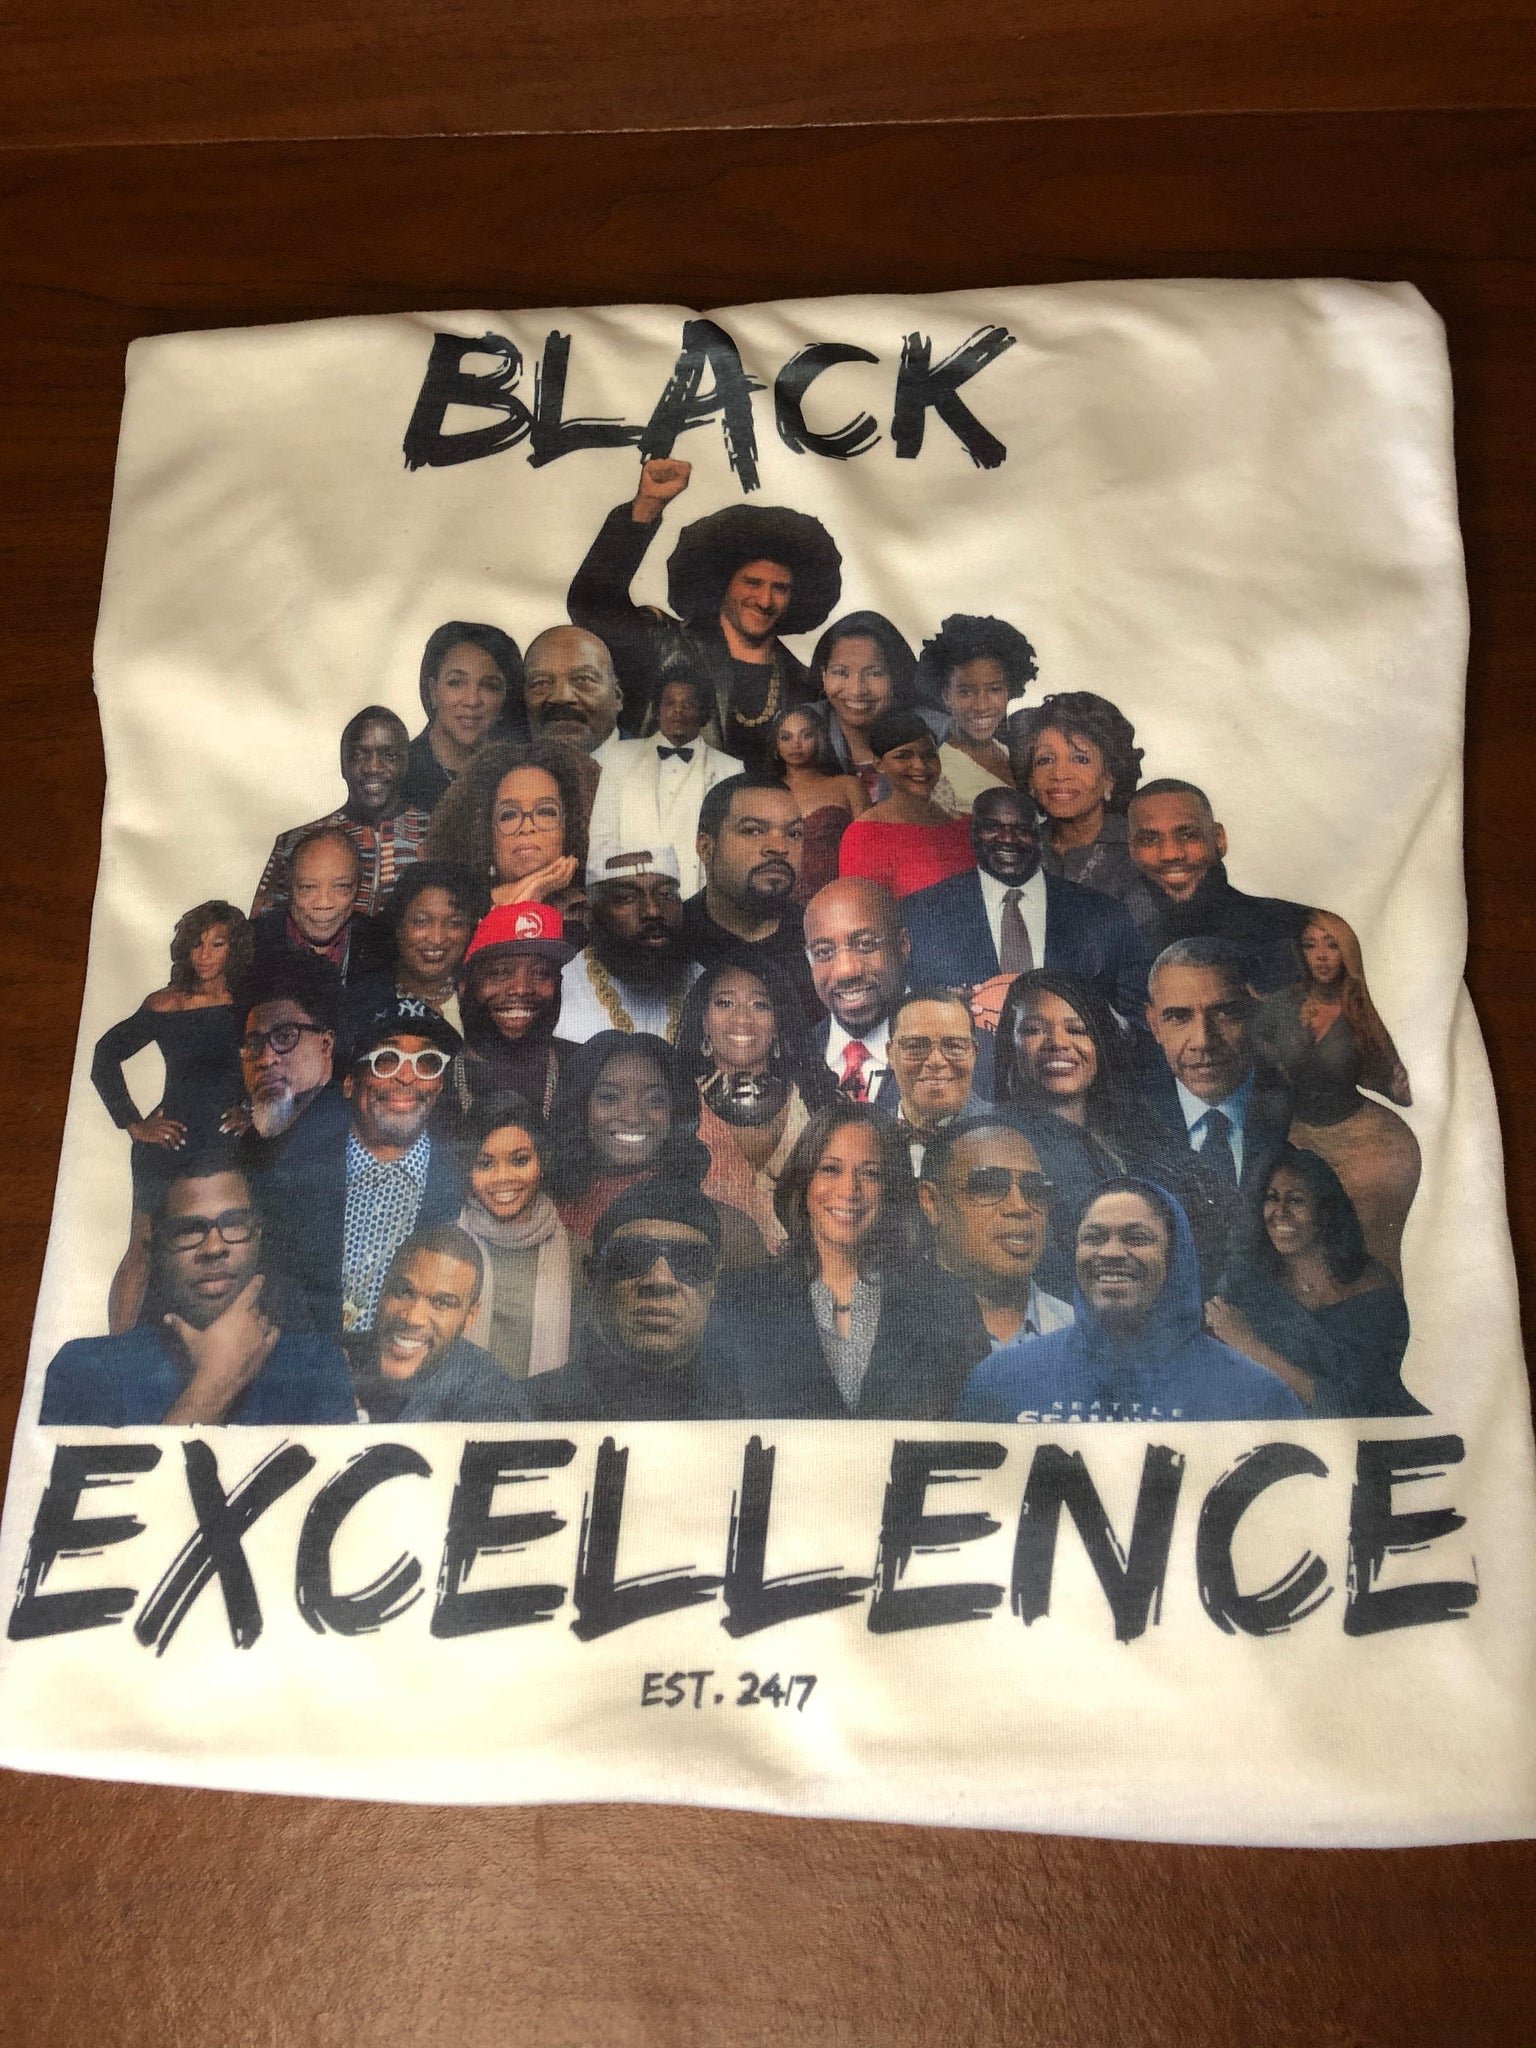 Black excellence shirt